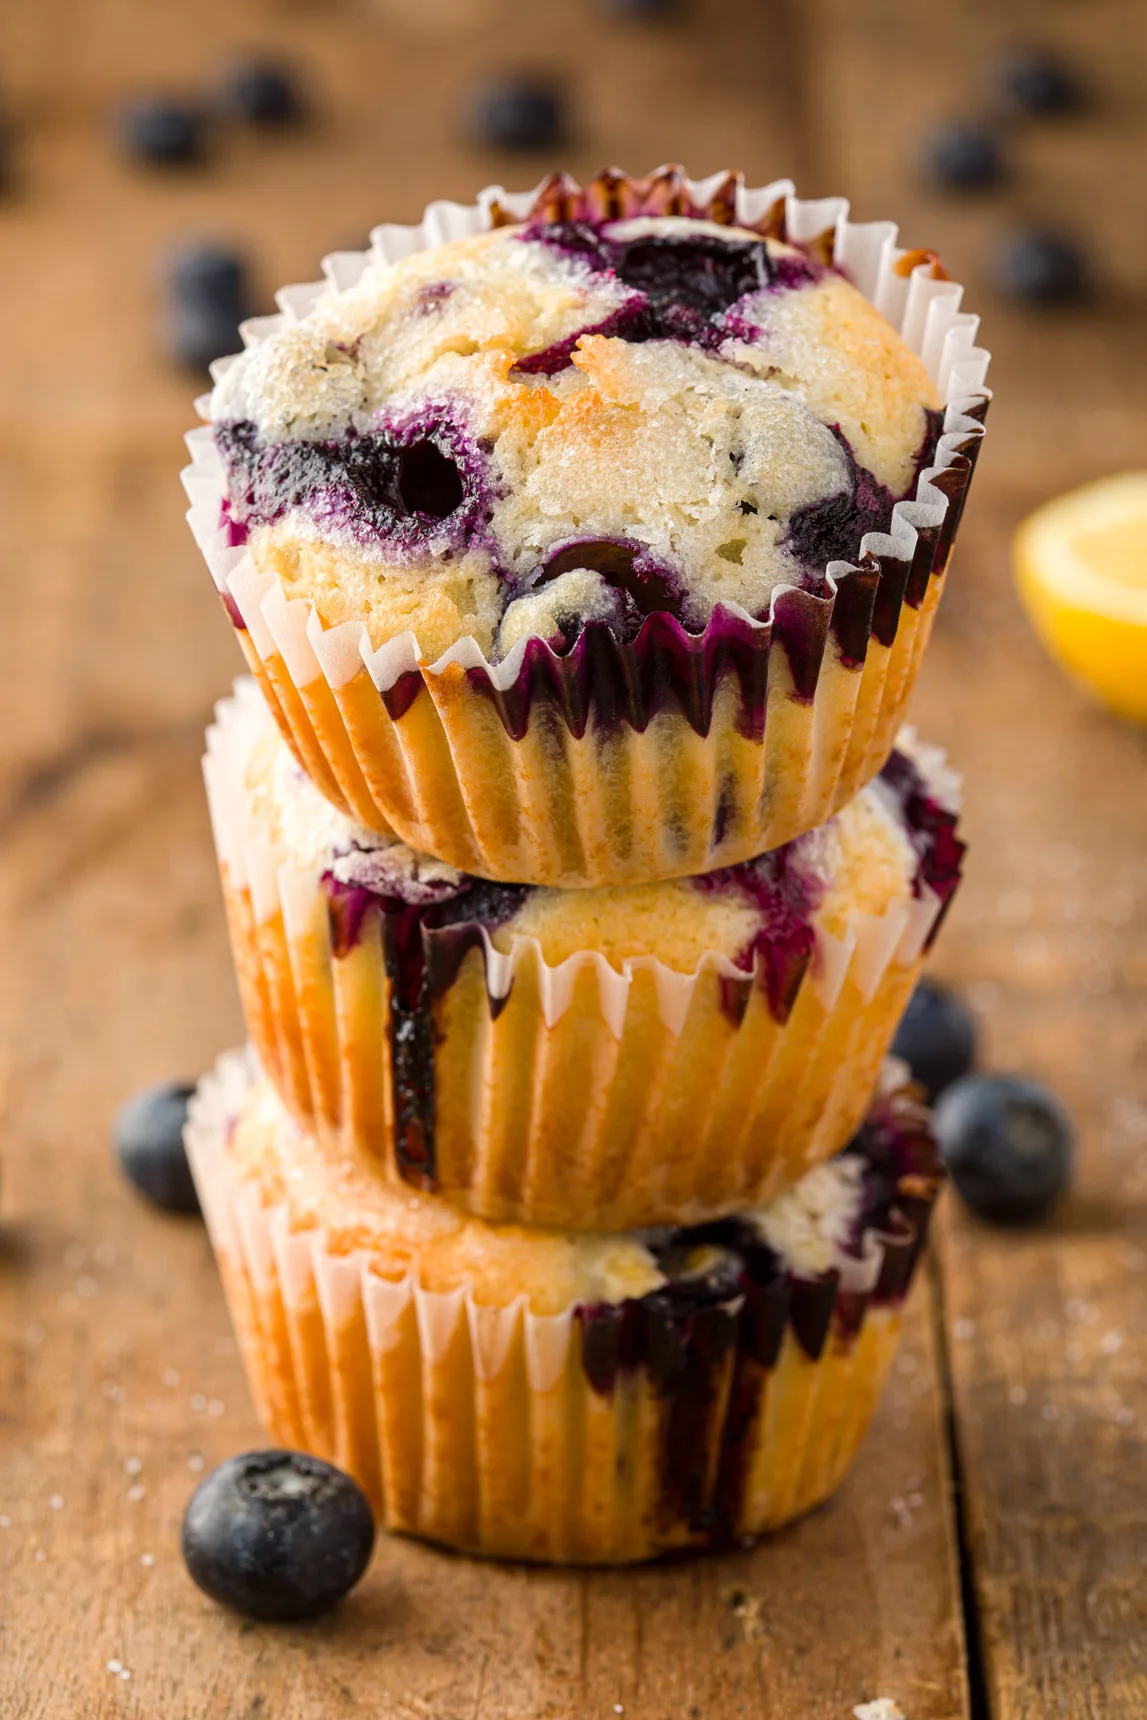 This image shows 3 lemon blueberry muffins stacked on top of each other.